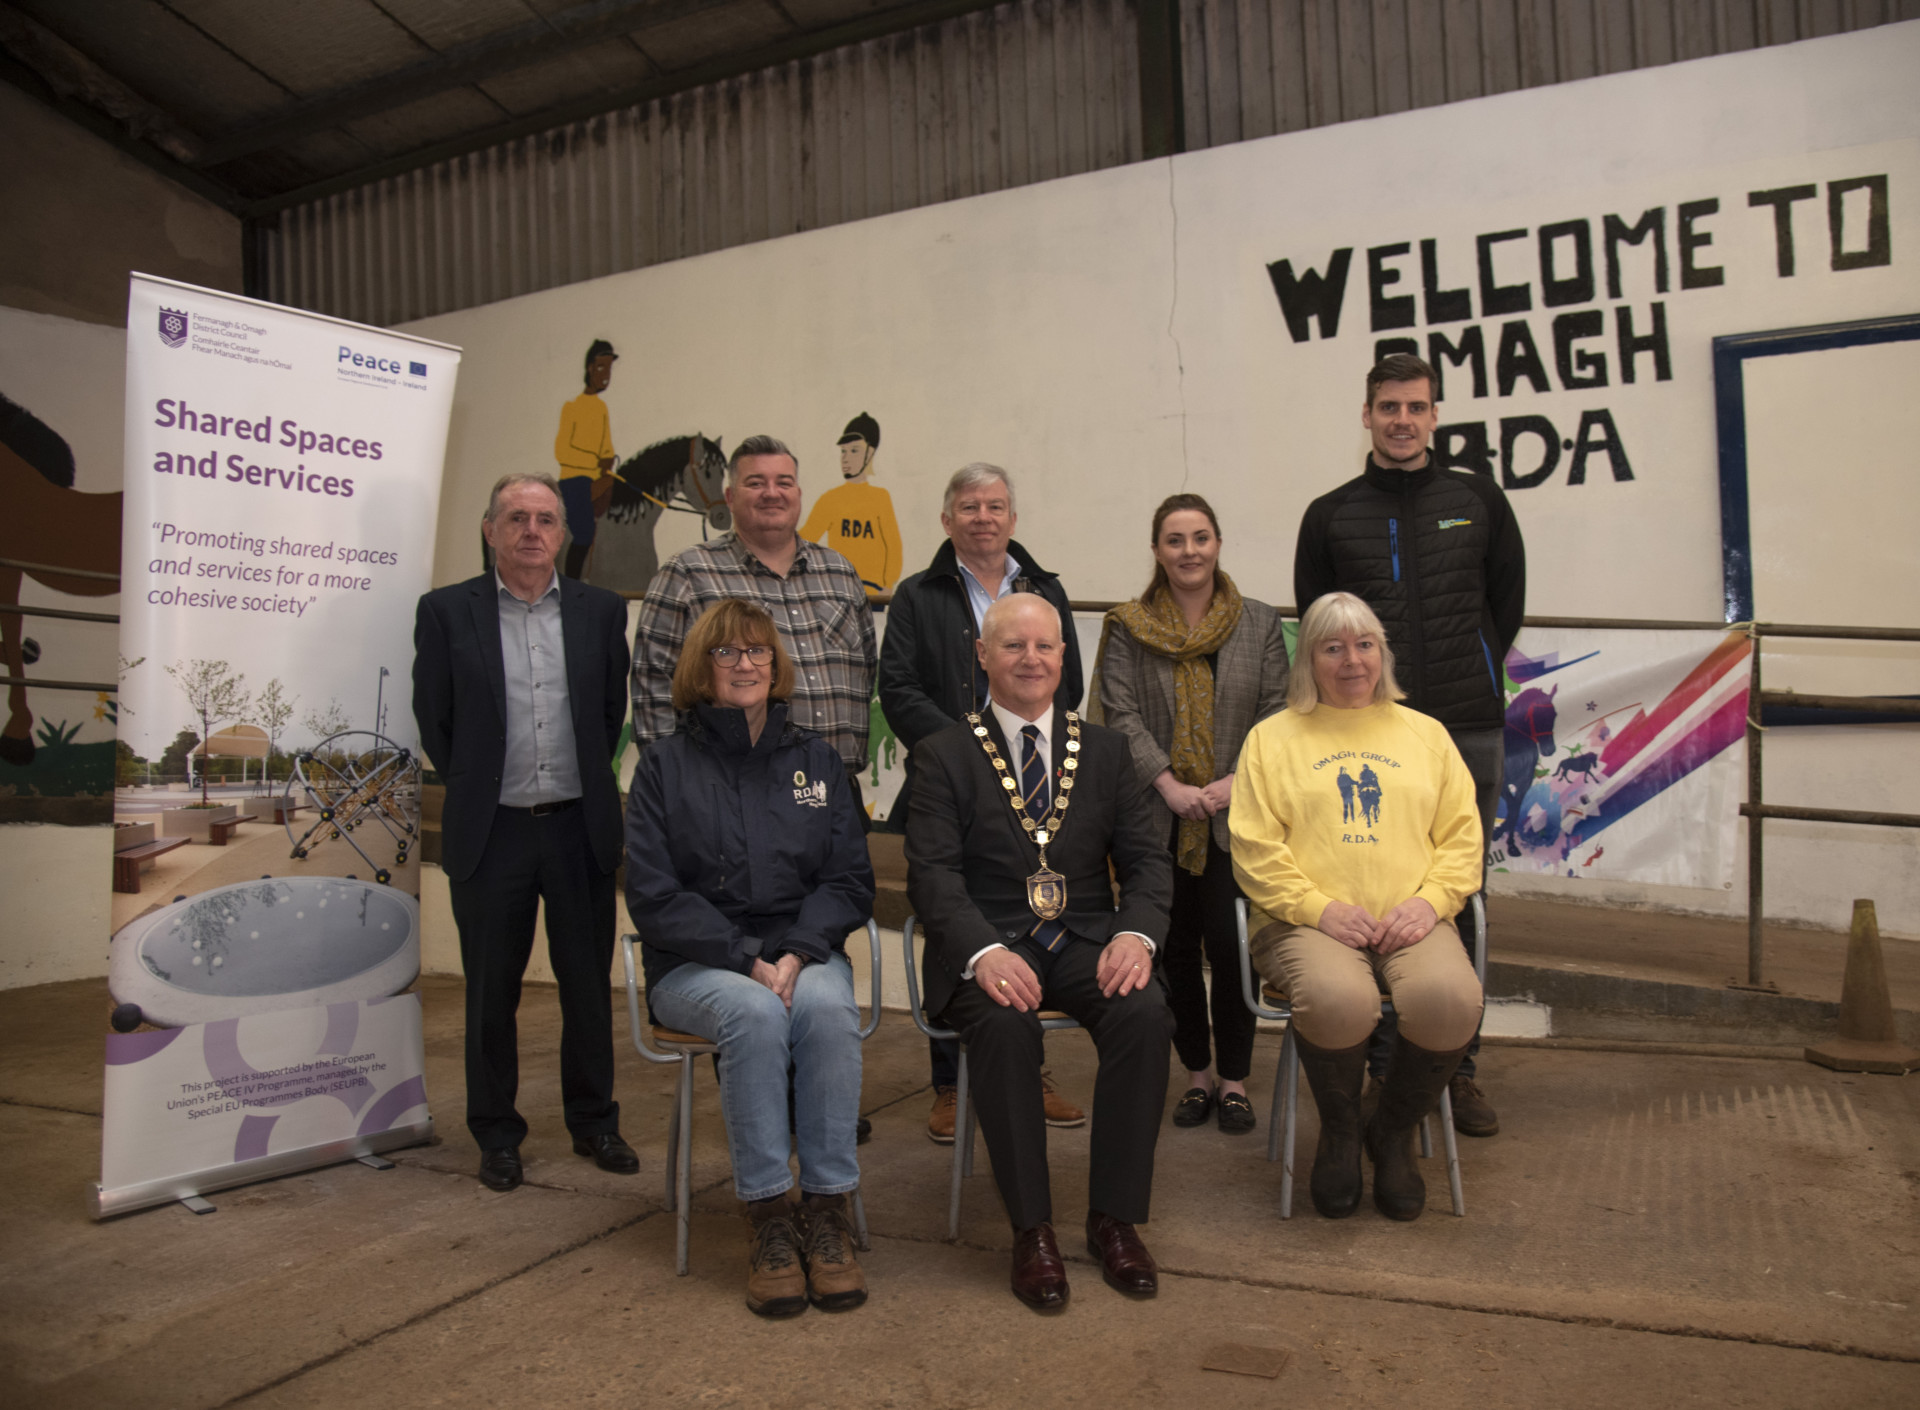 New stable block open at Omagh Riding School for Disabled